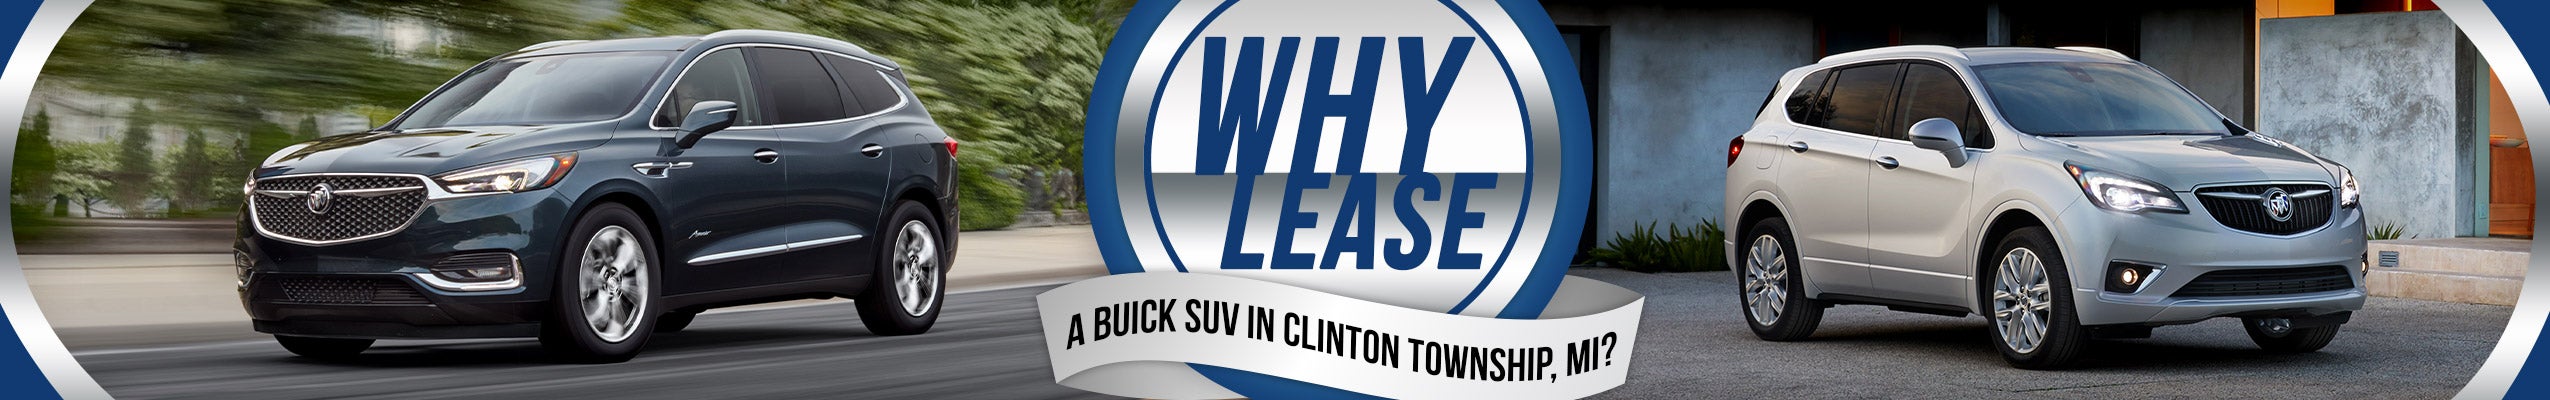 Why Lease A Buick SUV? - Clinton Twp, MI